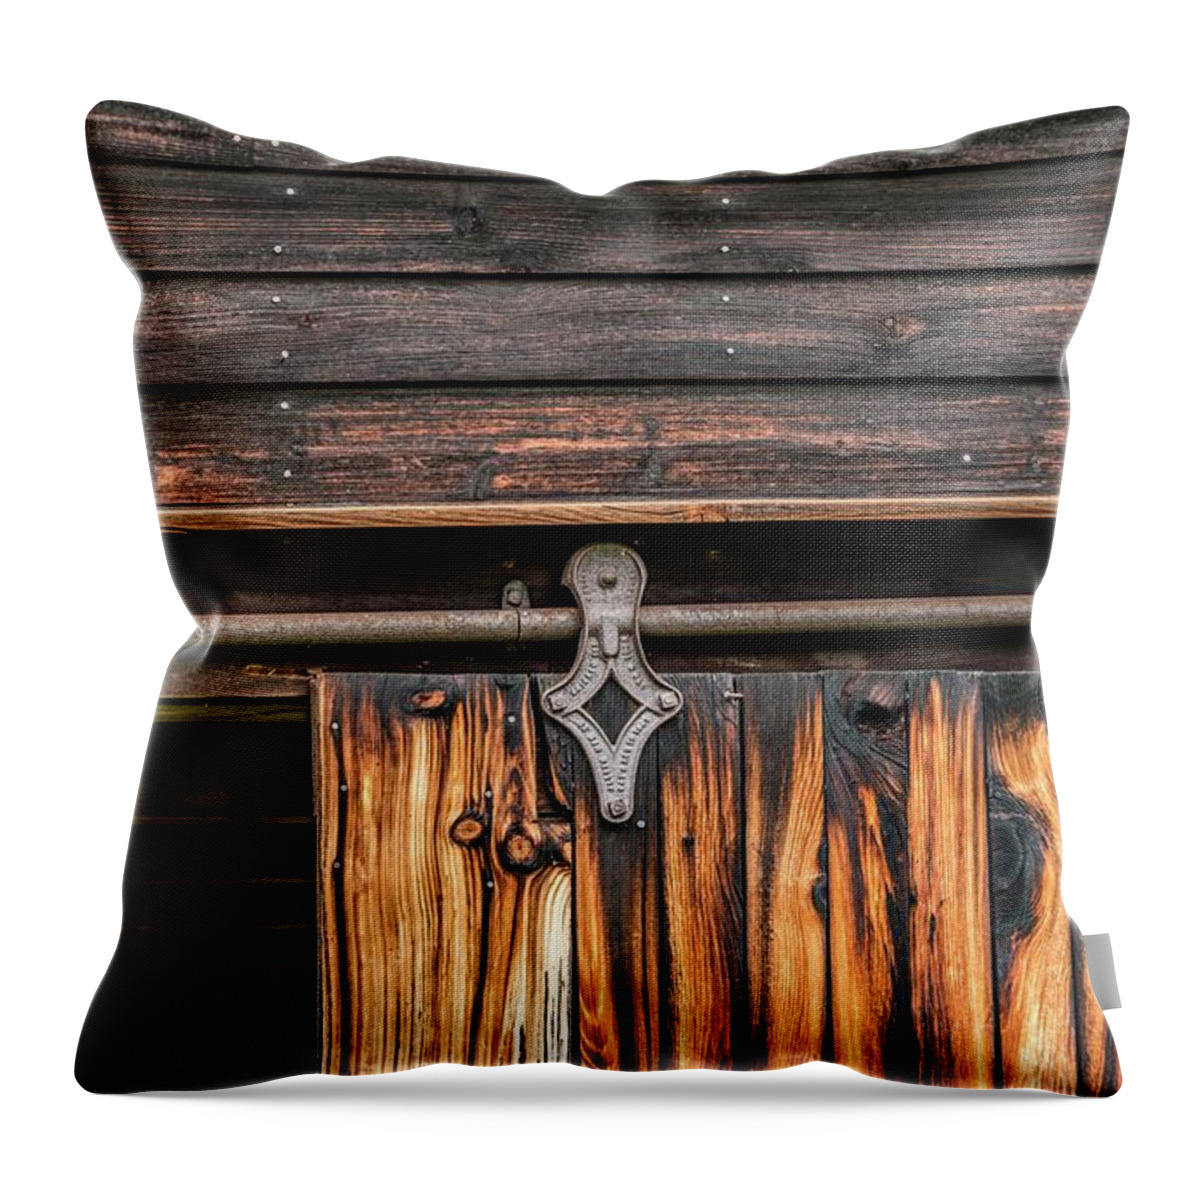 Barn Throw Pillow featuring the photograph Rollers and Rails by Pamela Taylor